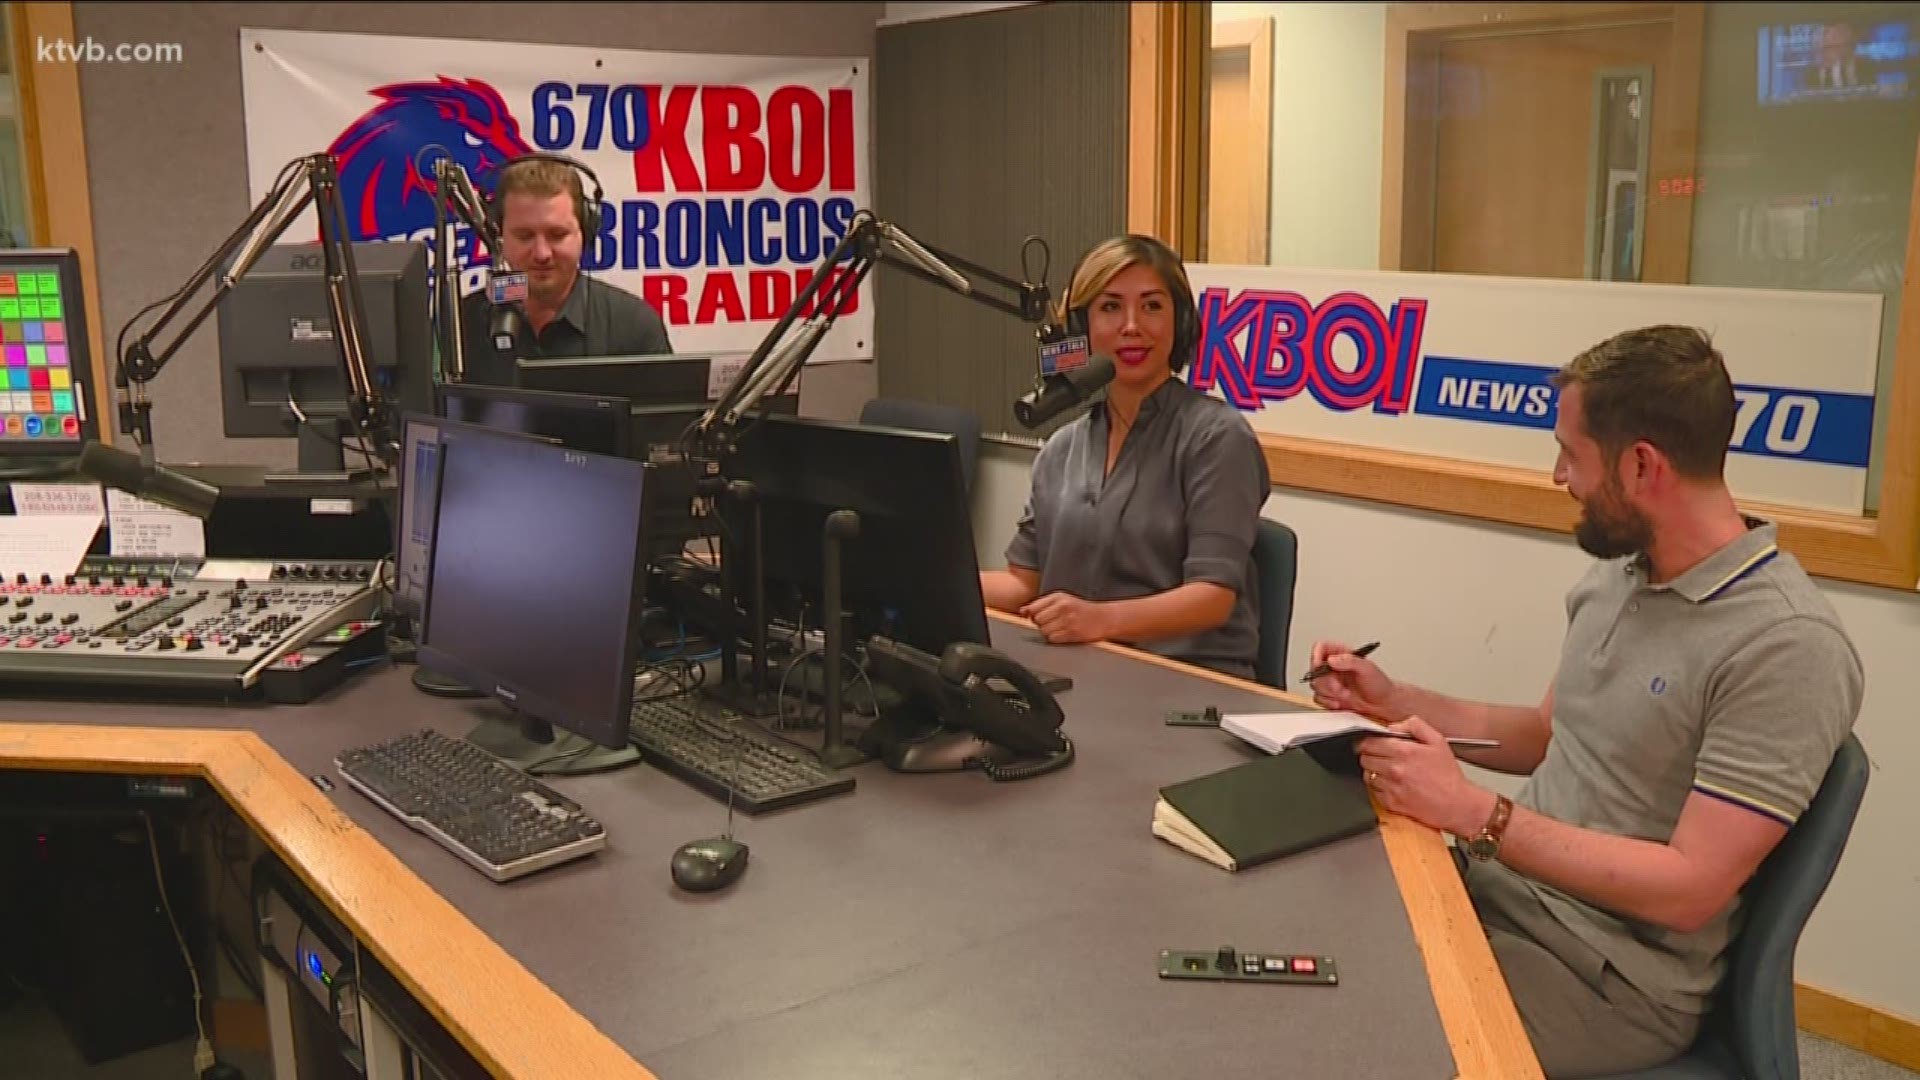 Staff shake-ups and super PAC ties made for a dramatic week at Idaho Democratic gubernatorial candidate Paulette Jordan's campaign headquarters. answered questions on The Nate Shelman Show on 670 KBOI talk radio about the latest headlines and her platform